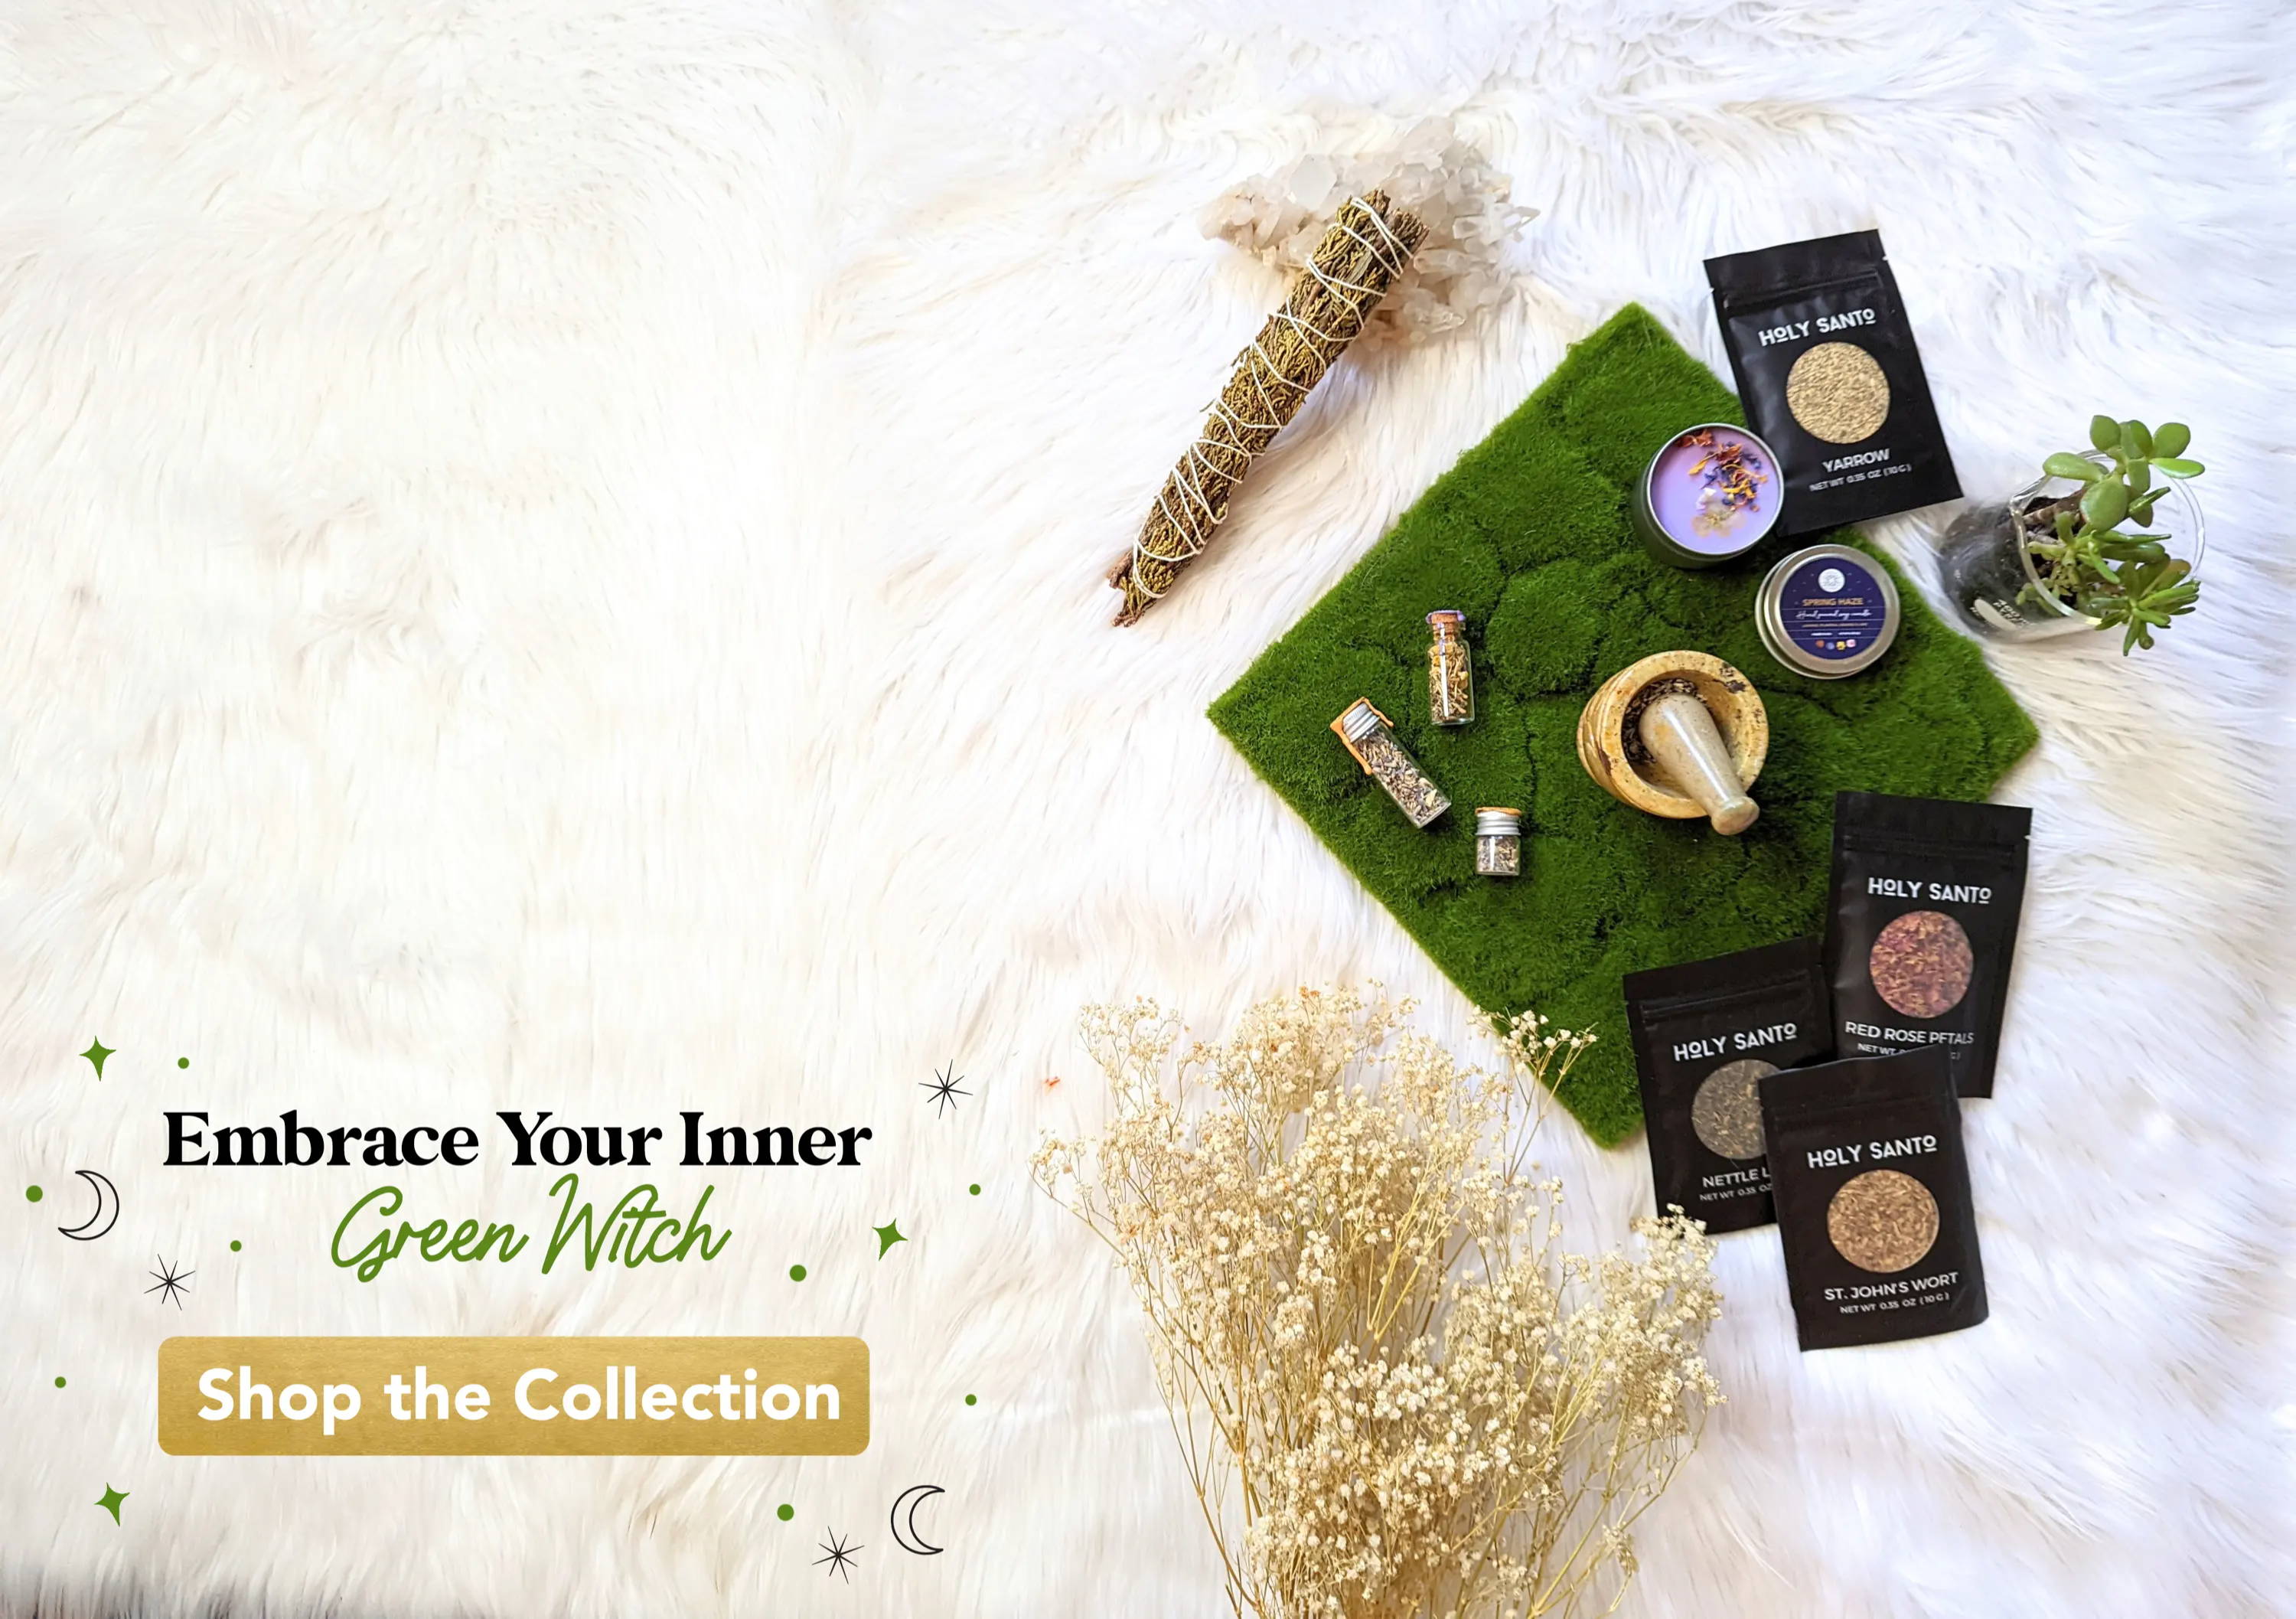 Embrace your inner green witch